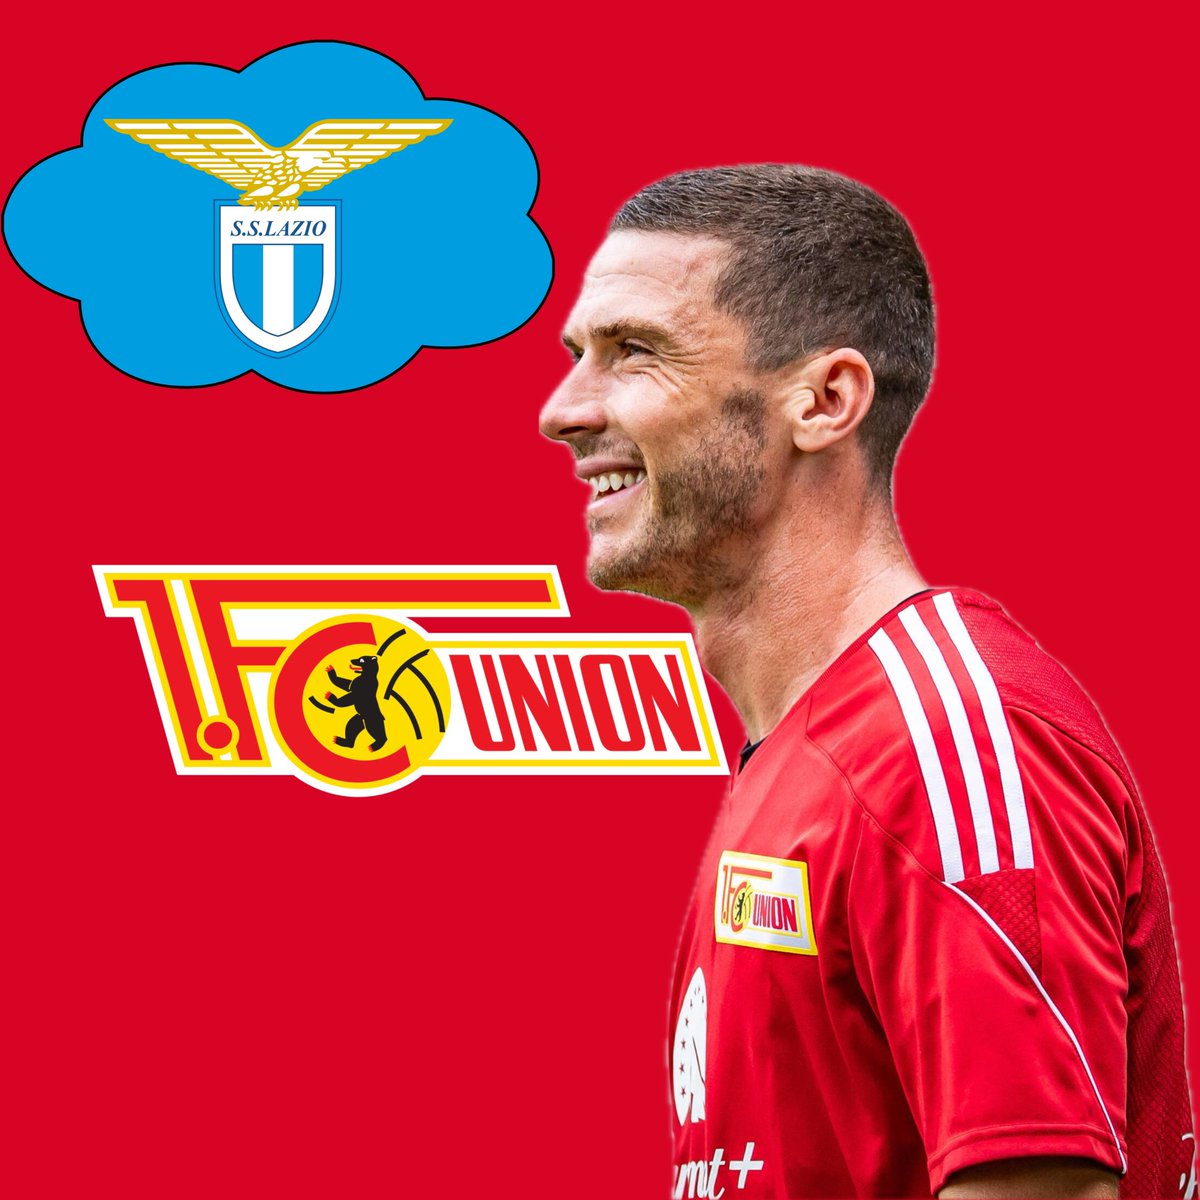 Robin #Gosens could soon be back in Italy.

➡️ LazioRome has already made contact according to @kicker.

➡️ Lazio has good chances of international competition next season, which could make it interesting for Gosens.

#Lazio #unionberlin